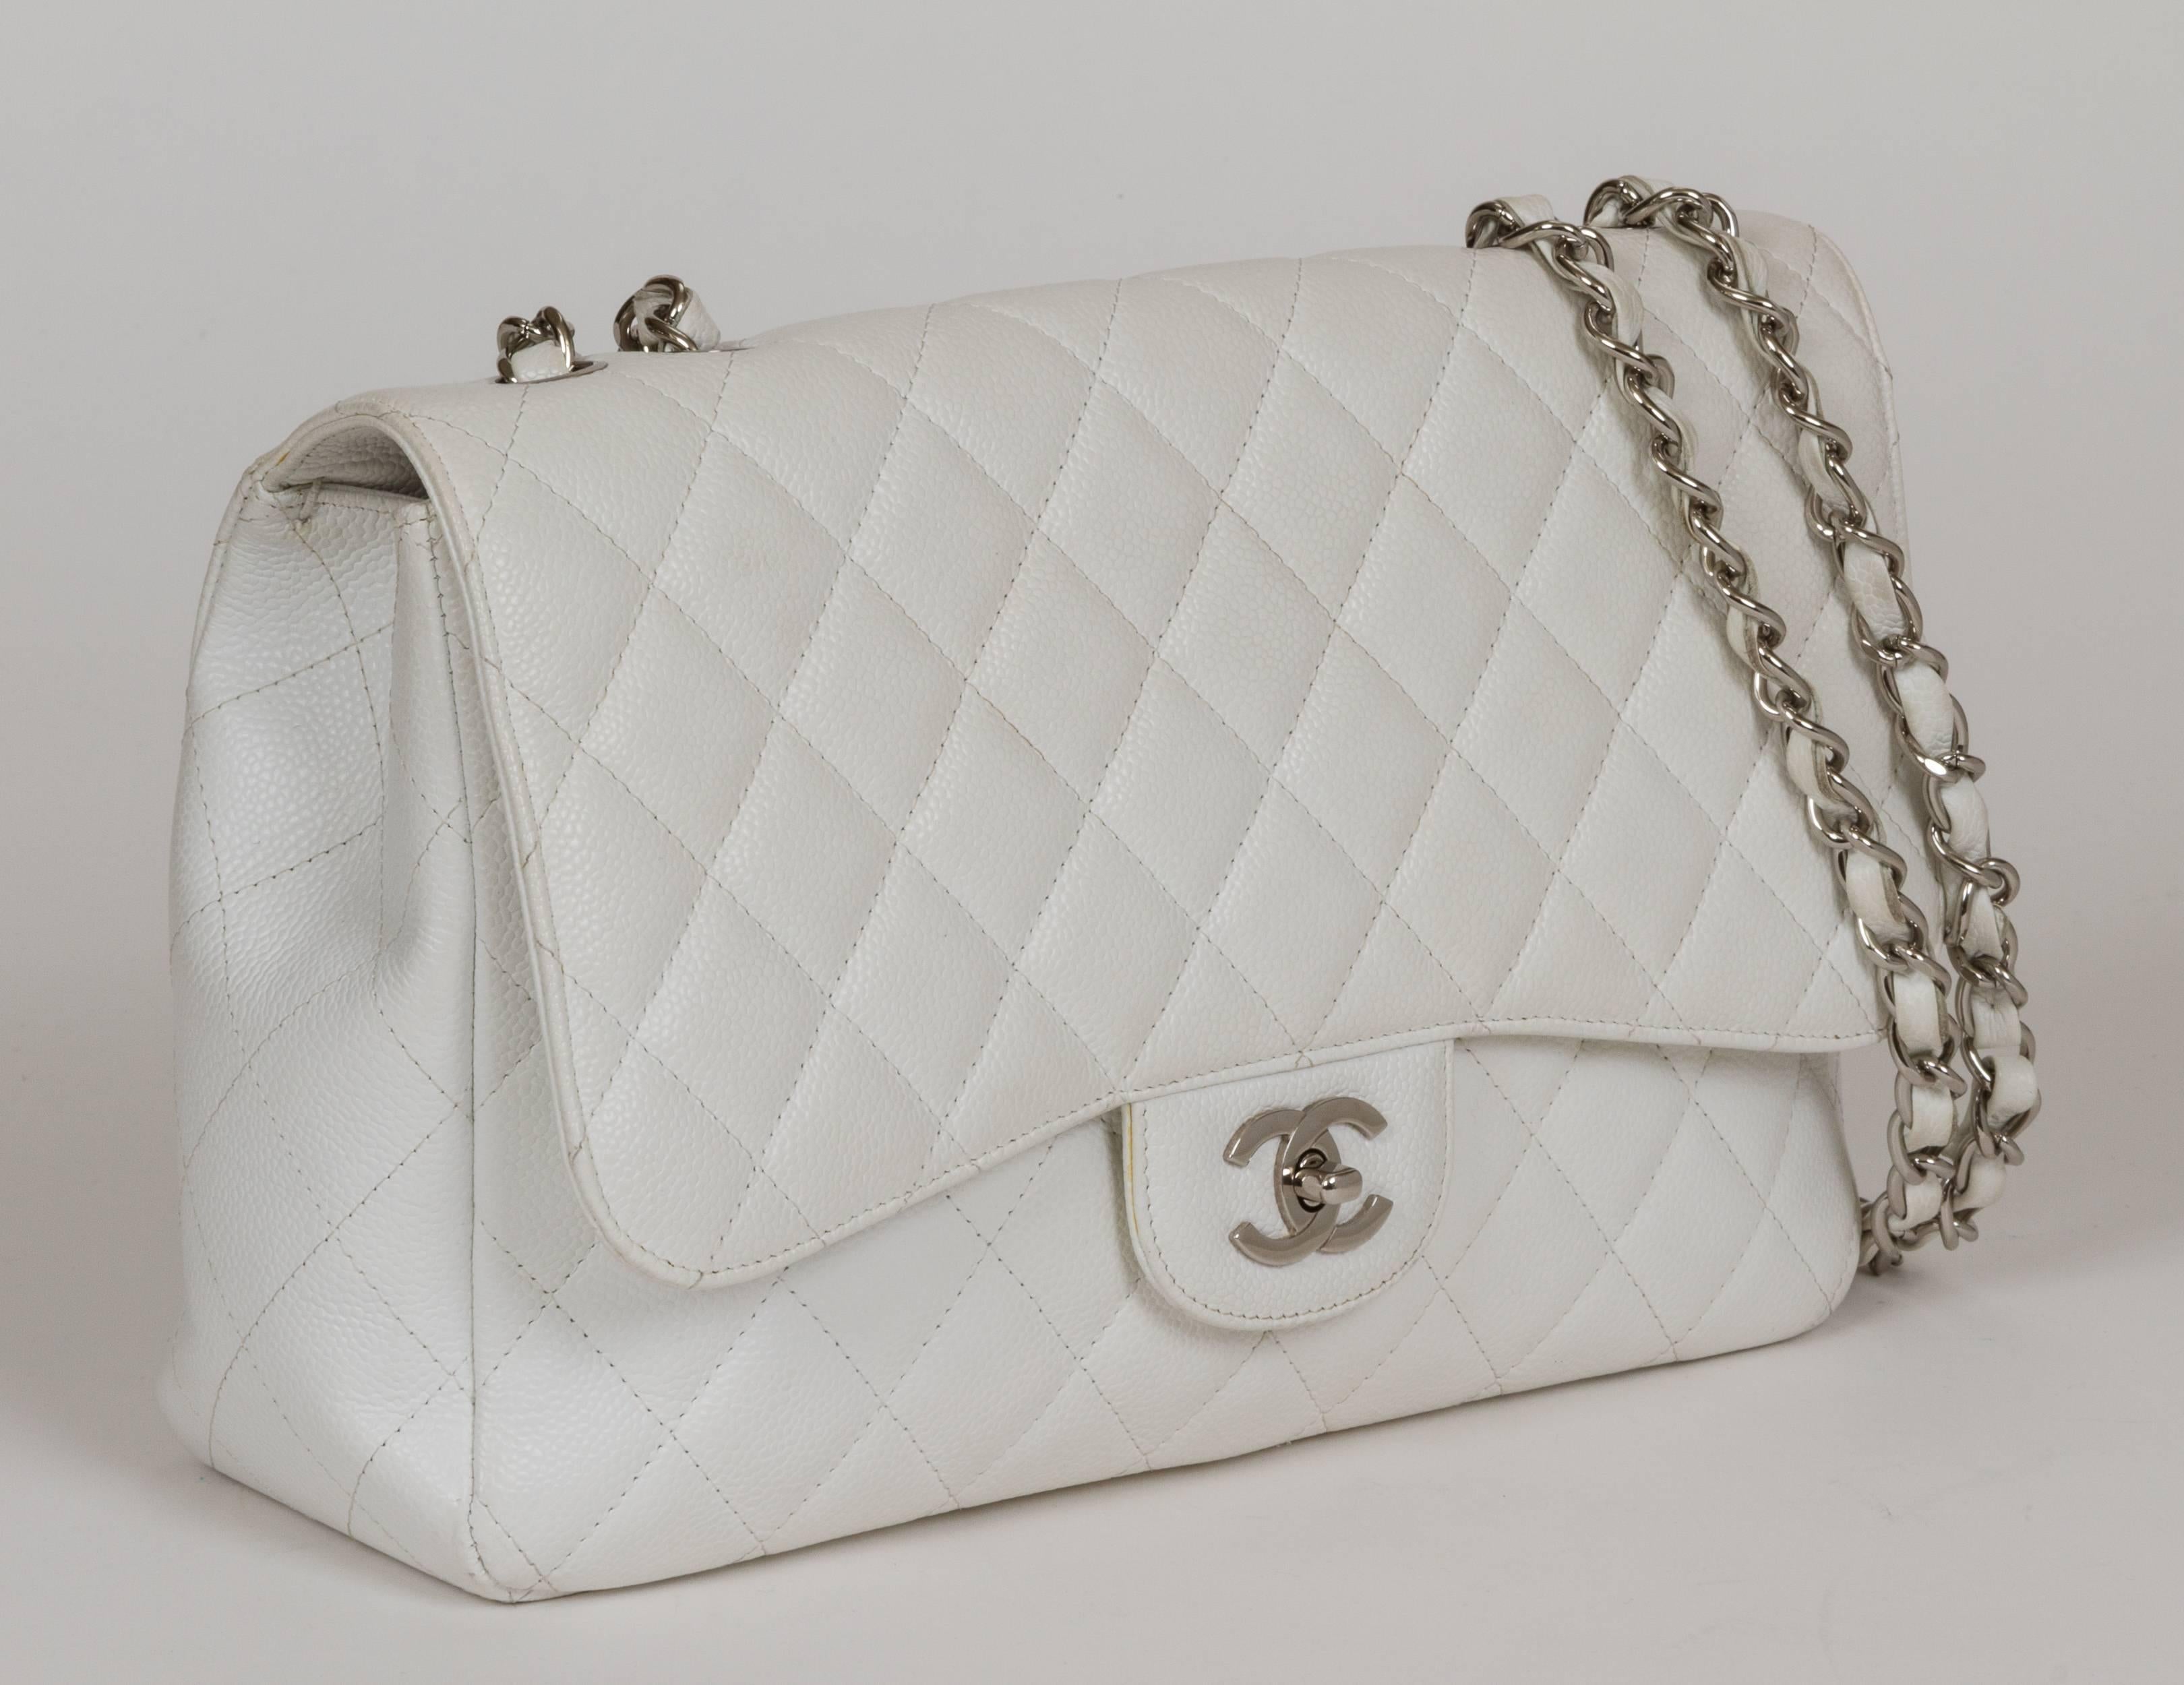 Chanel single-flap jumbo classic. Durable white caviar leather and silvertone hardware. Double drop, 13